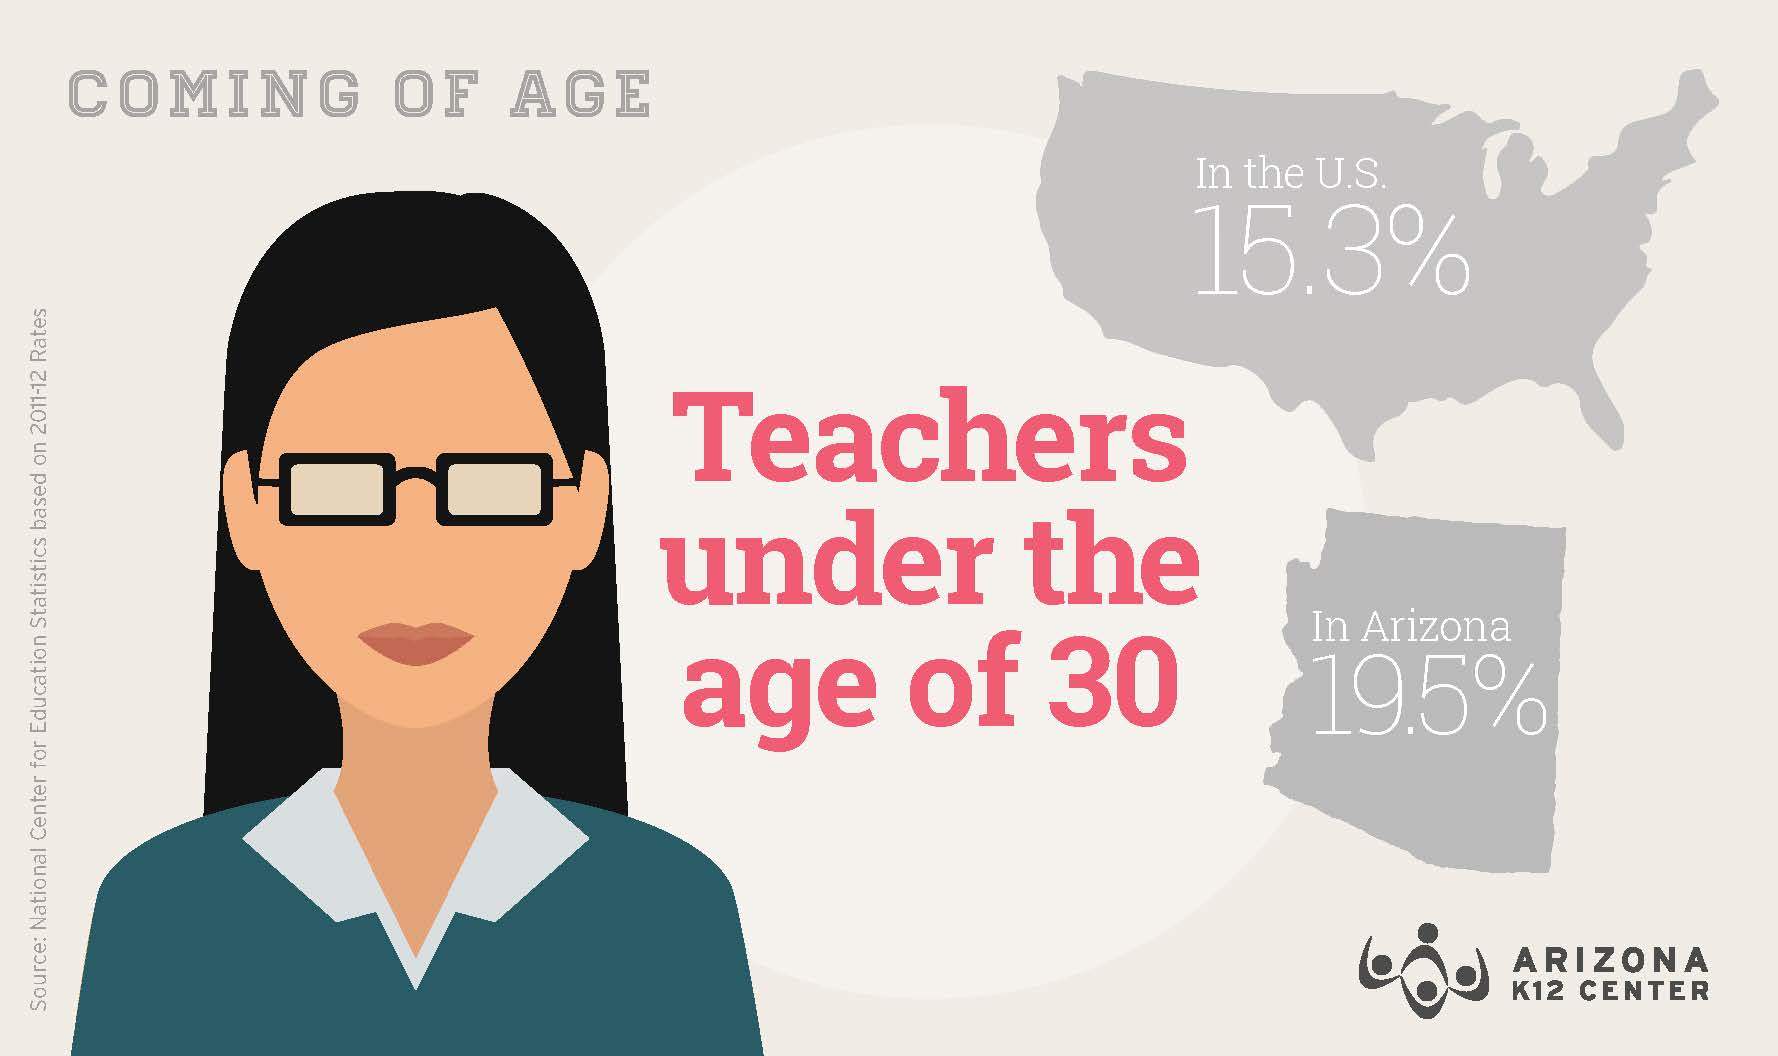 Are You a Teacher Under 30? You’re Not Alone (Especially in Arizona)